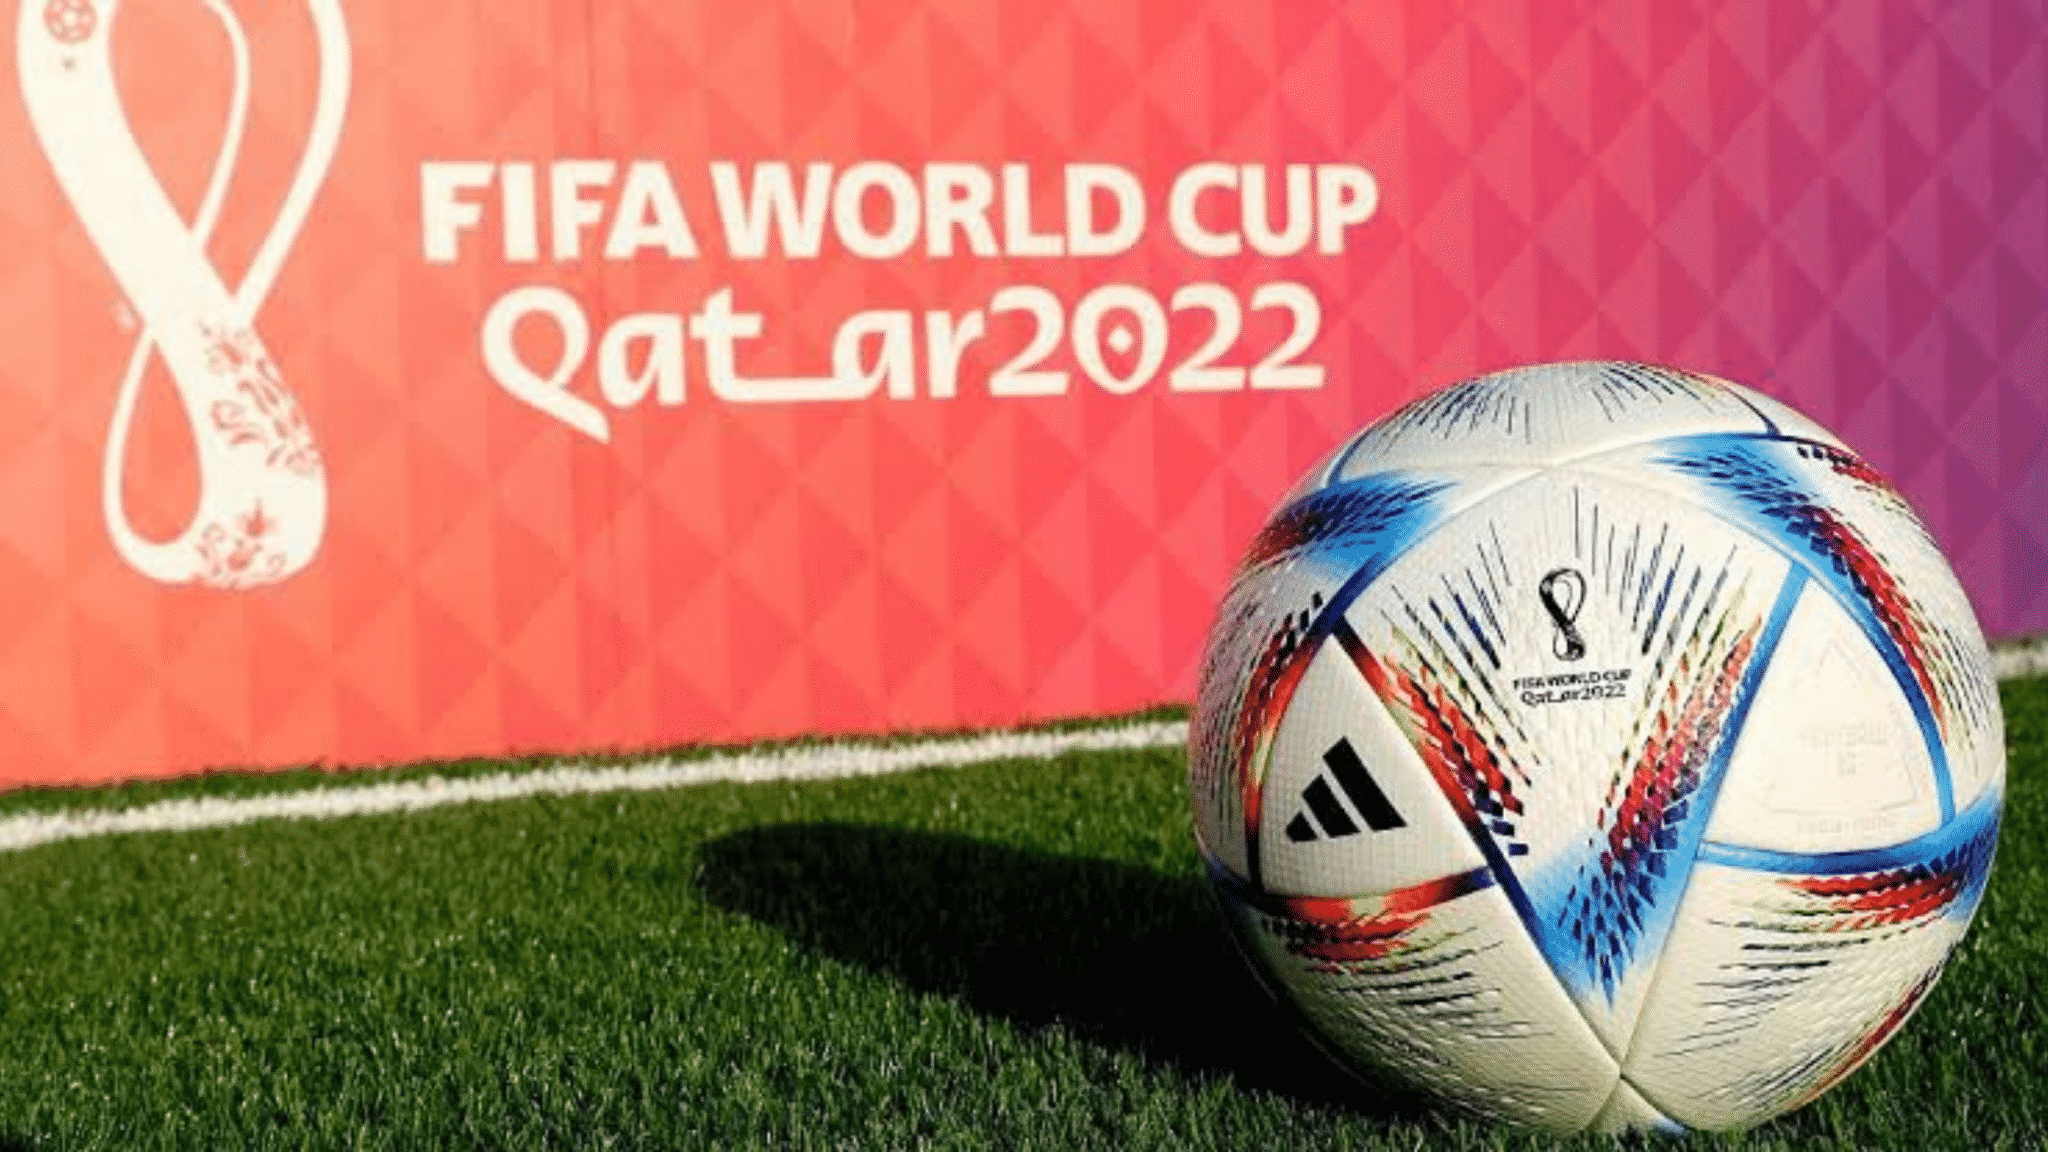 World Cup latest: FIFA expects 5 billion viewers for Qatar World Cup, My Football Facts